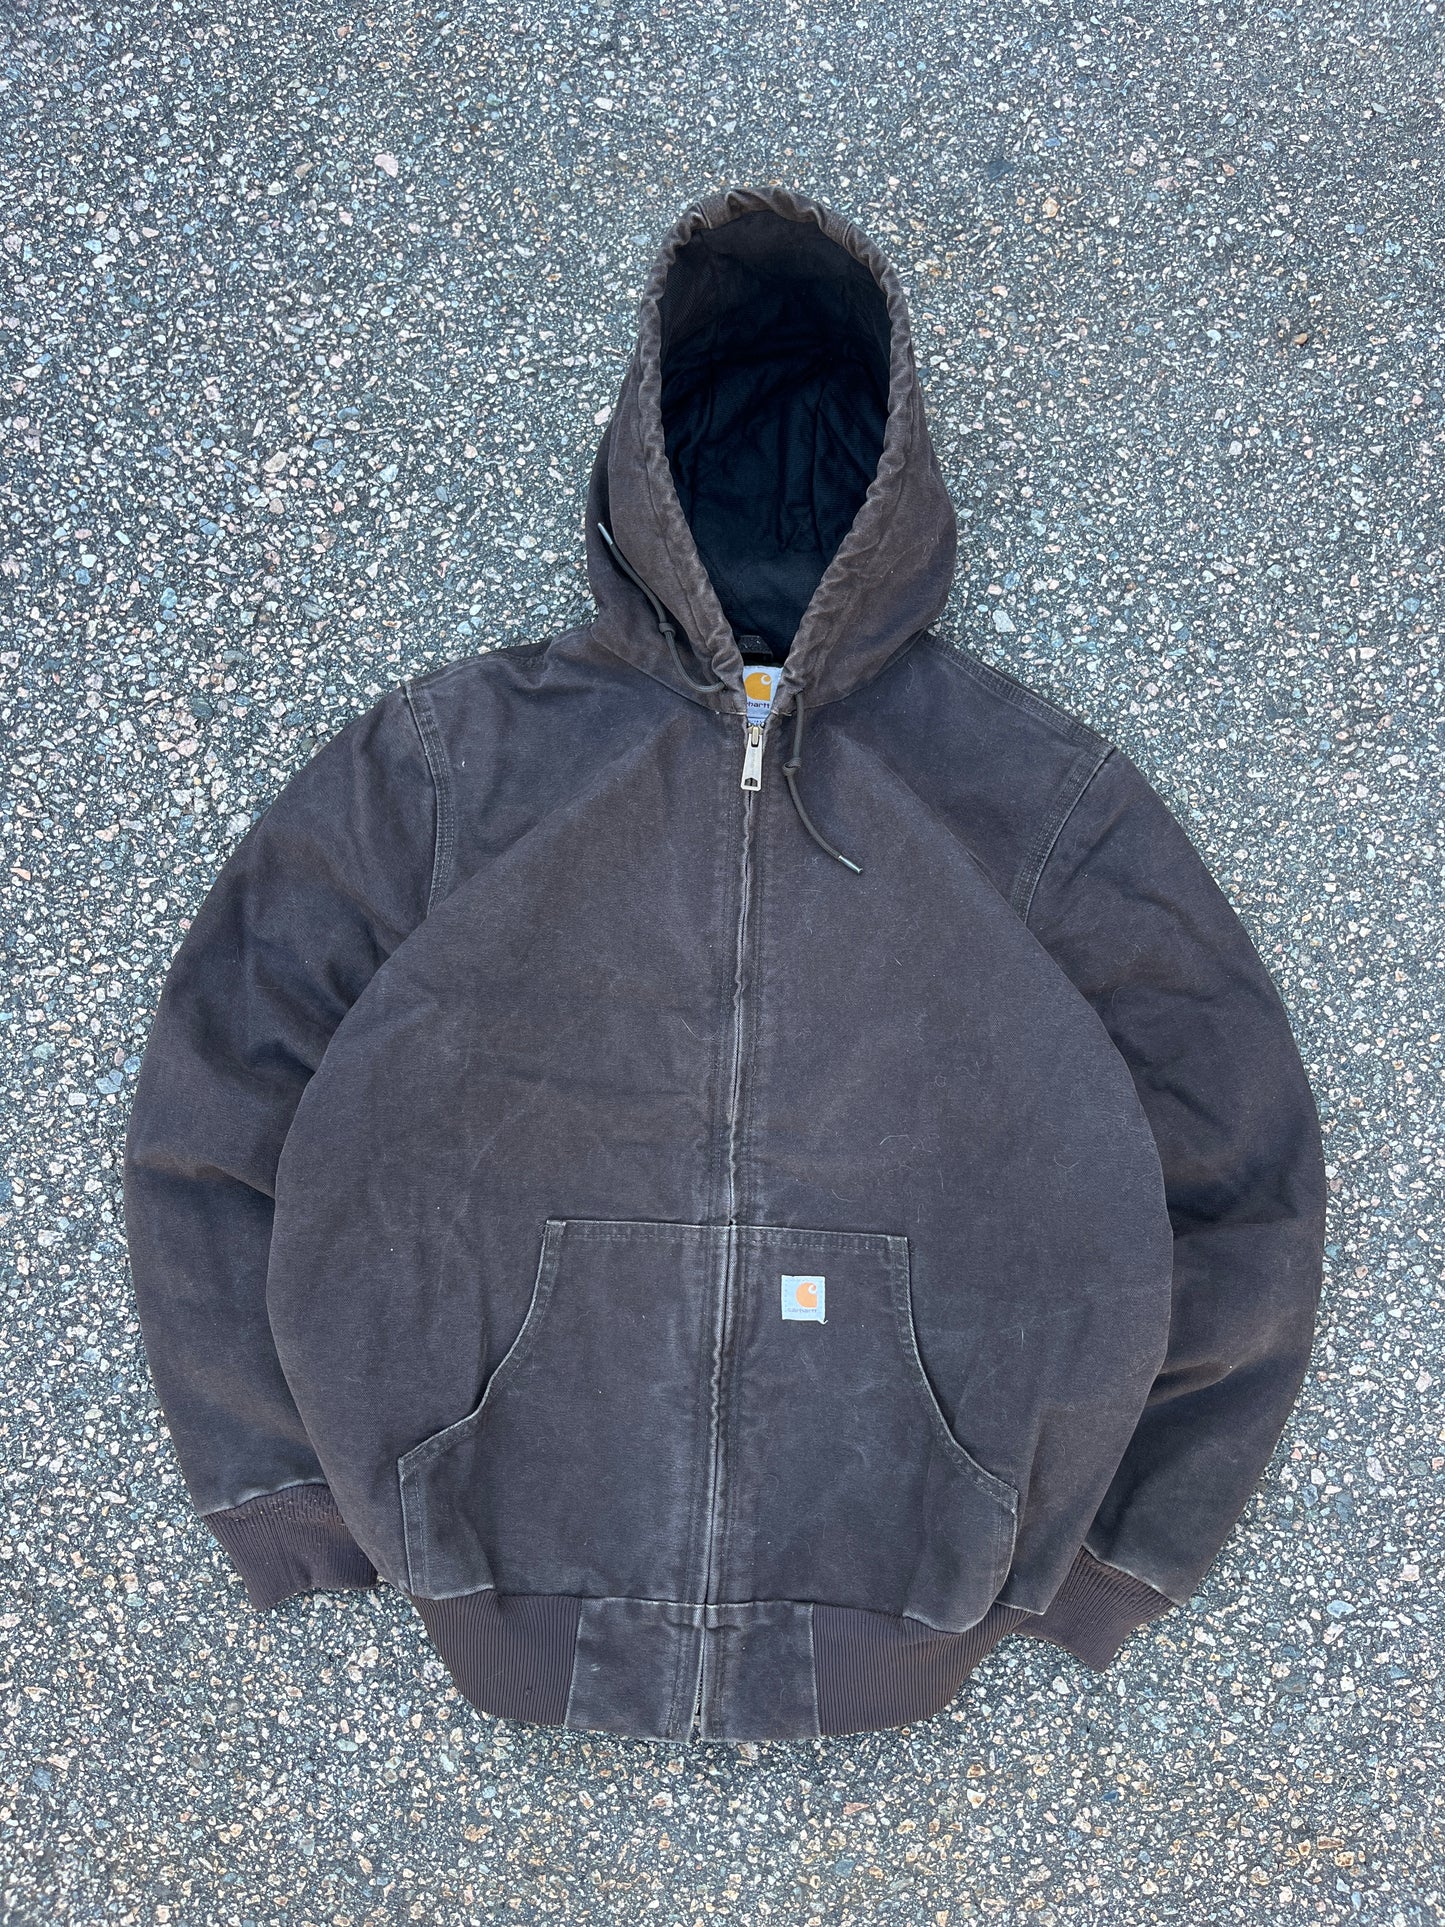 Faded Brown Carhartt Active Jacket - Fits M-L